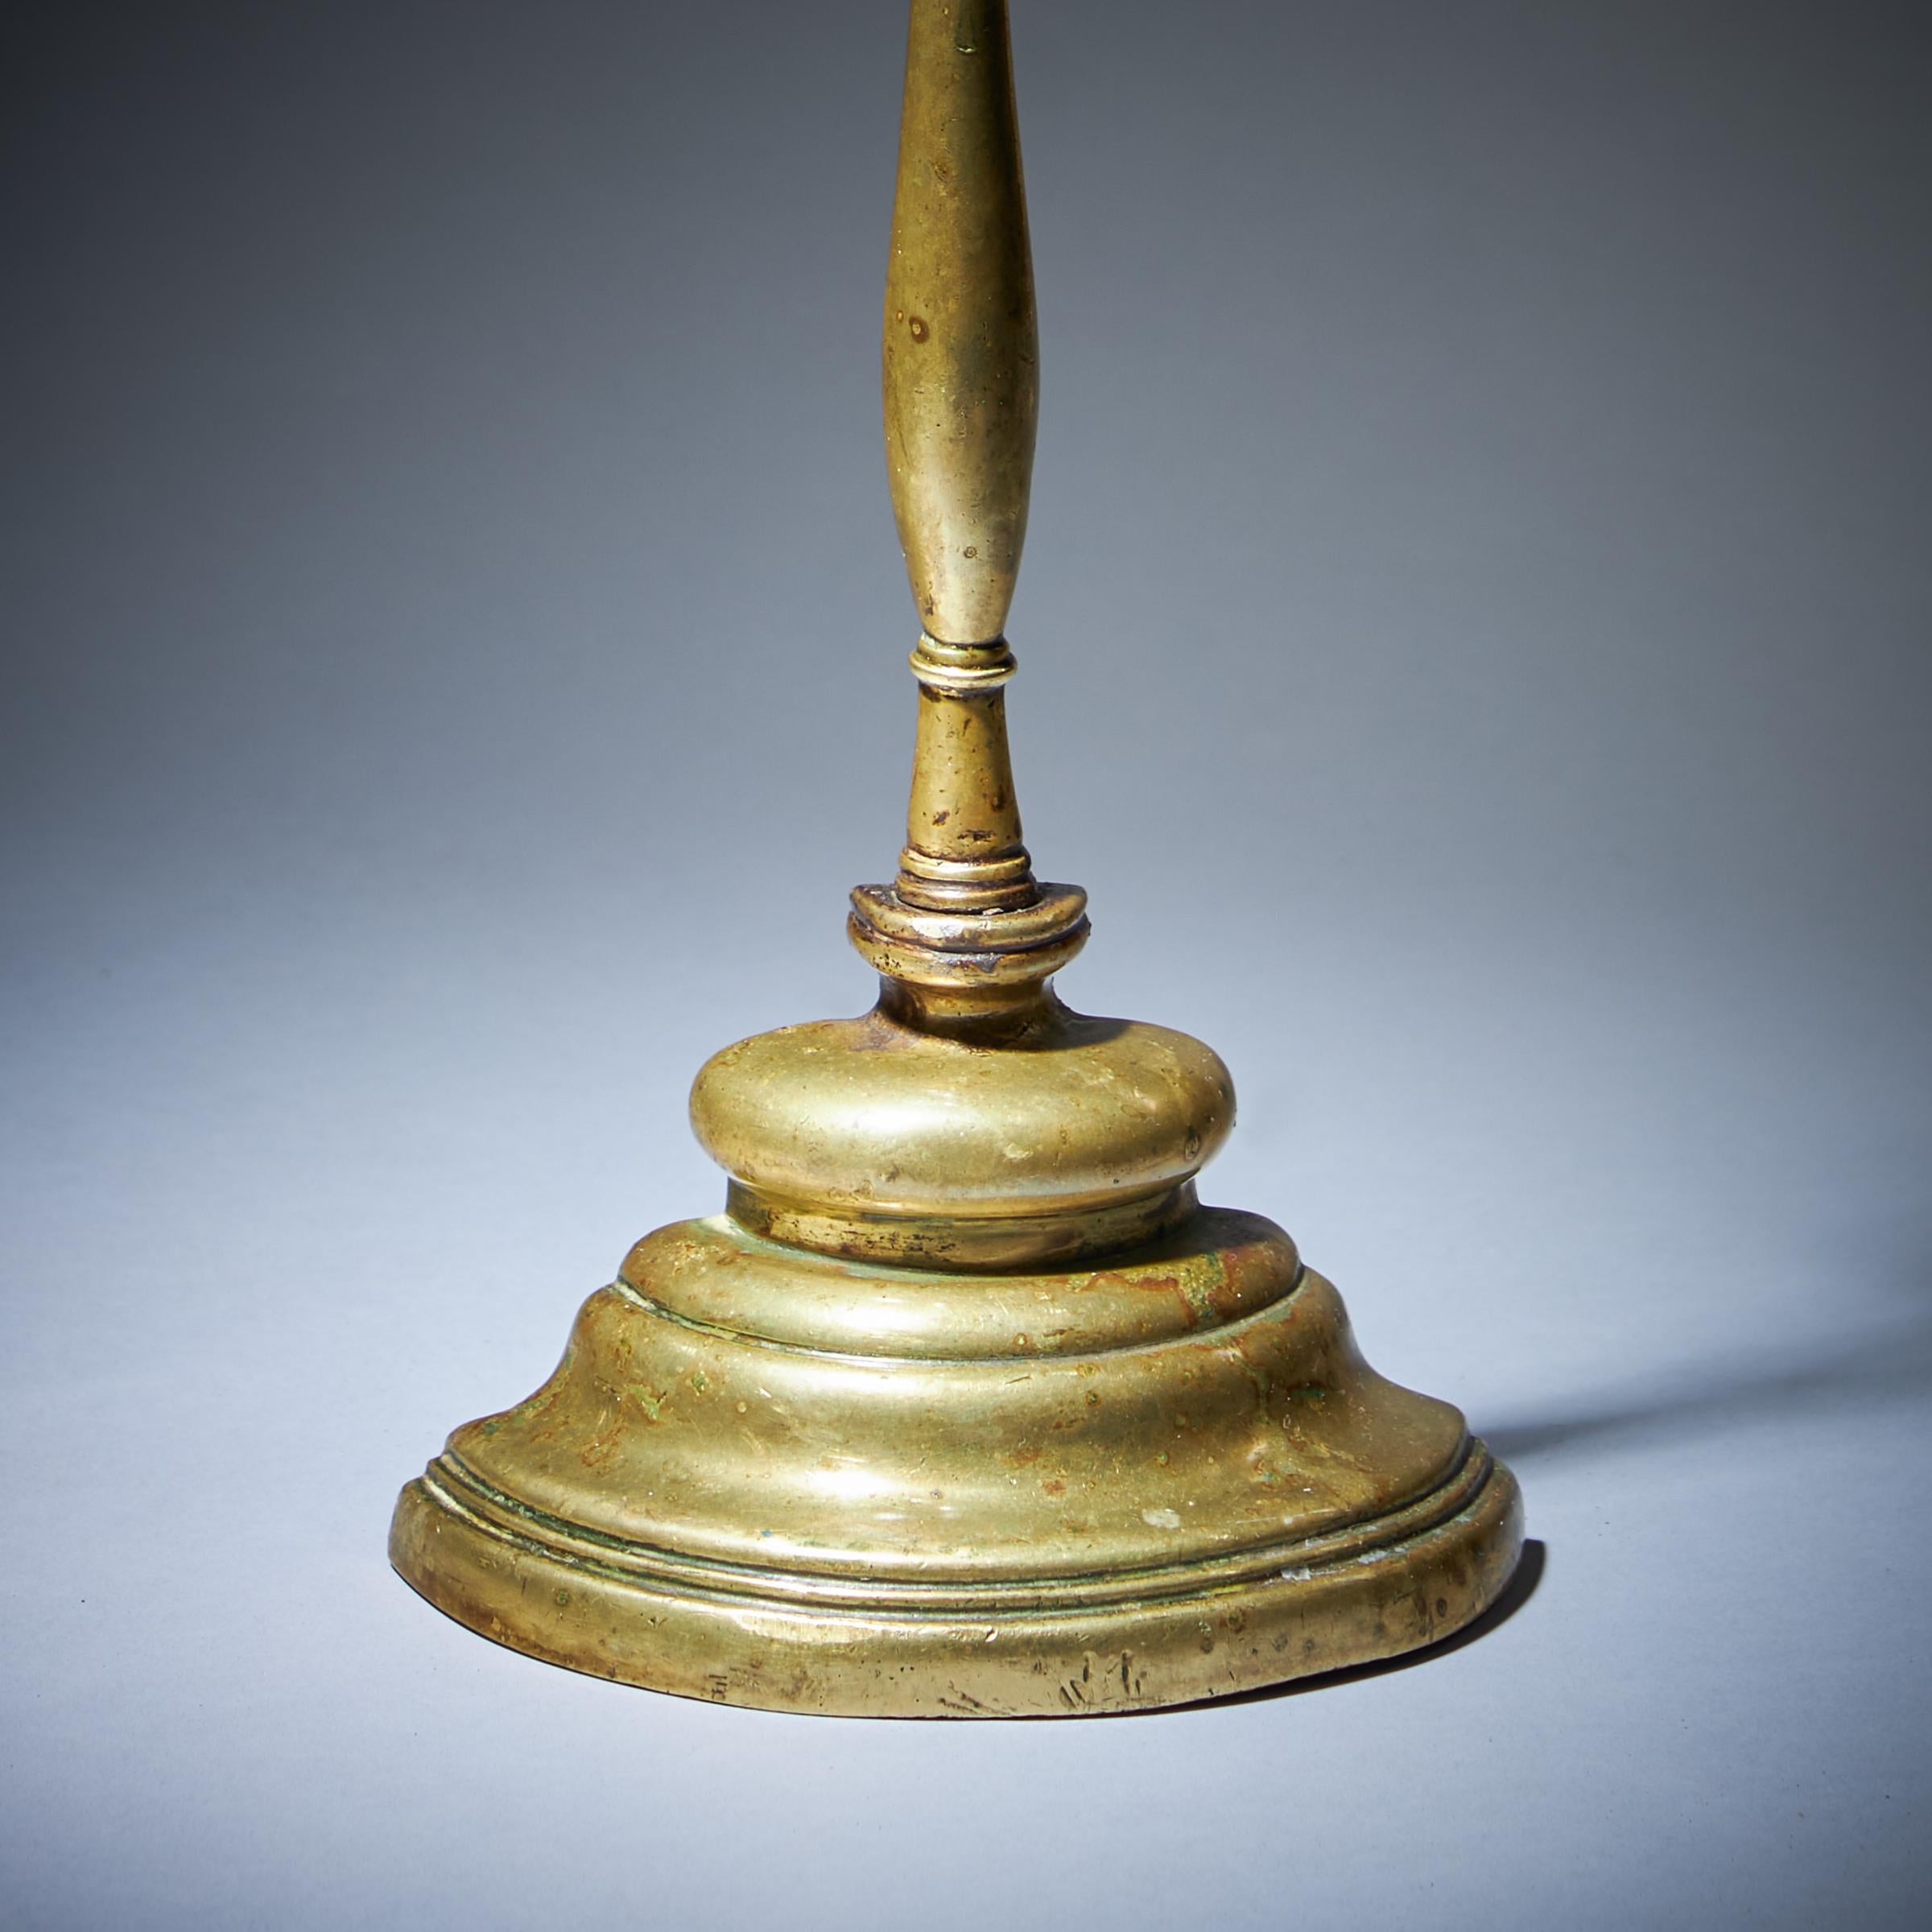 A Rare 18th Century Georgian Brass Doorstop from the Reign of King George III 2